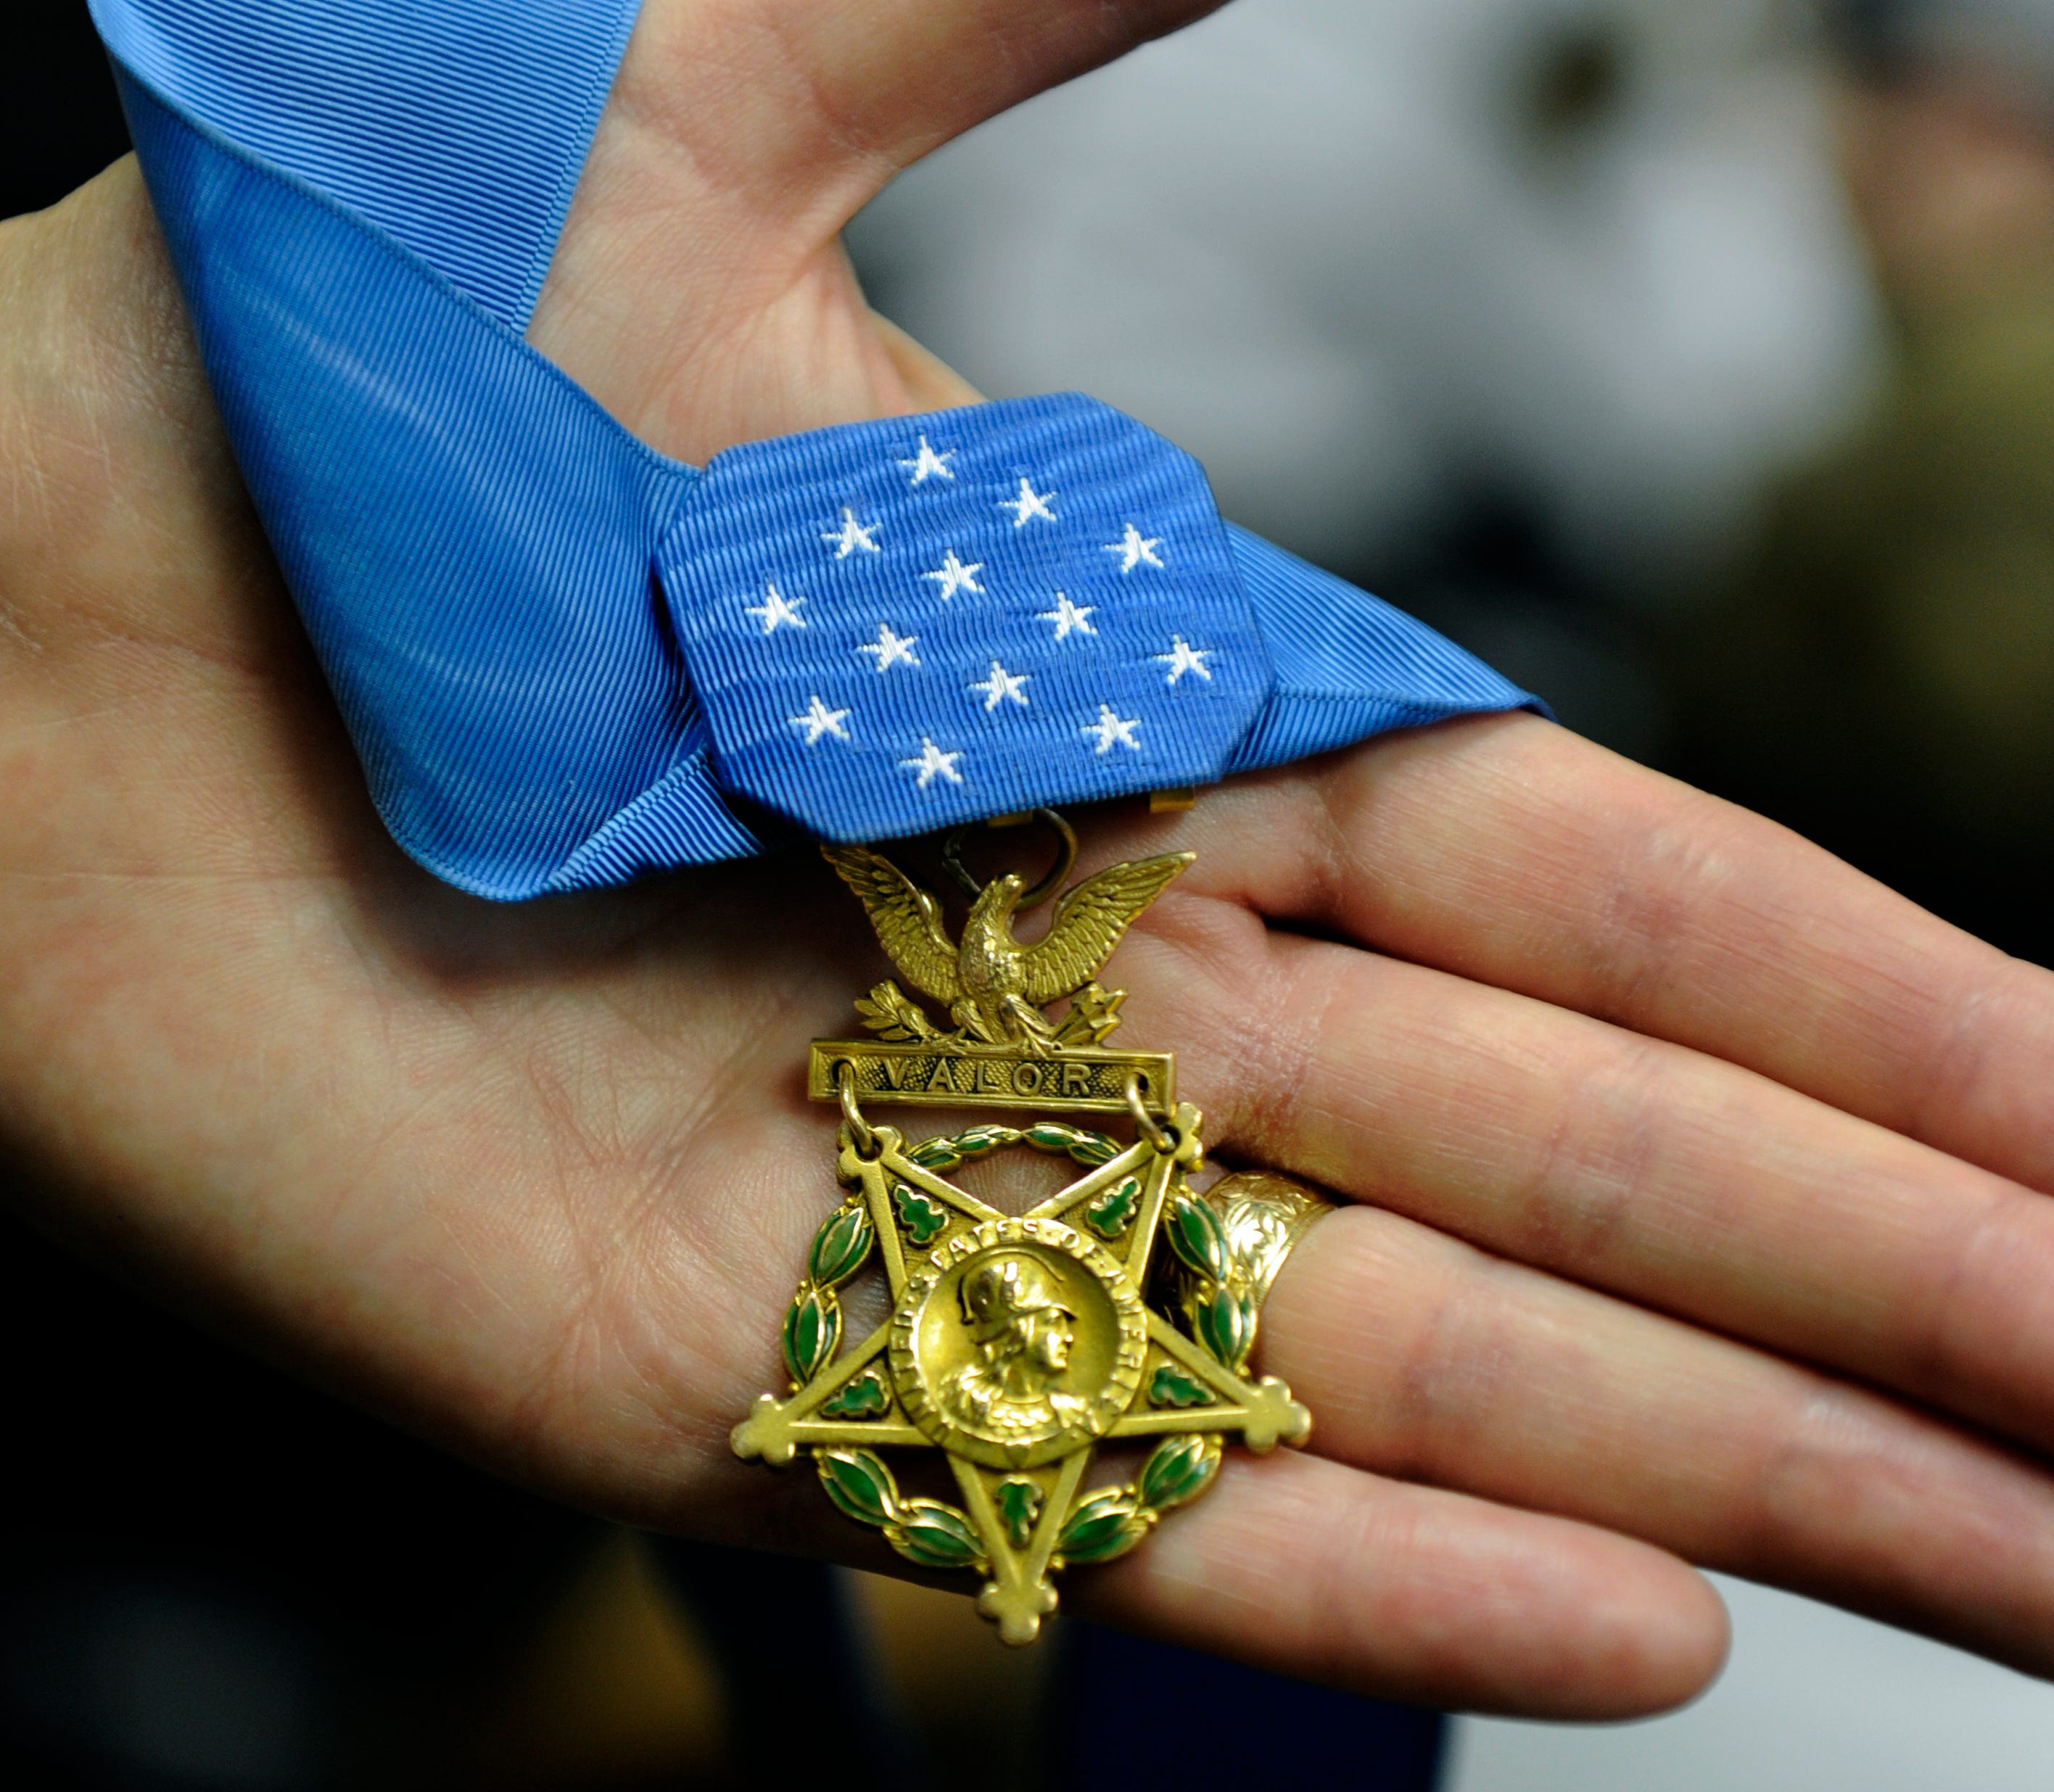 Missing hand only change in Medal of Honor recipient - friends say, Article